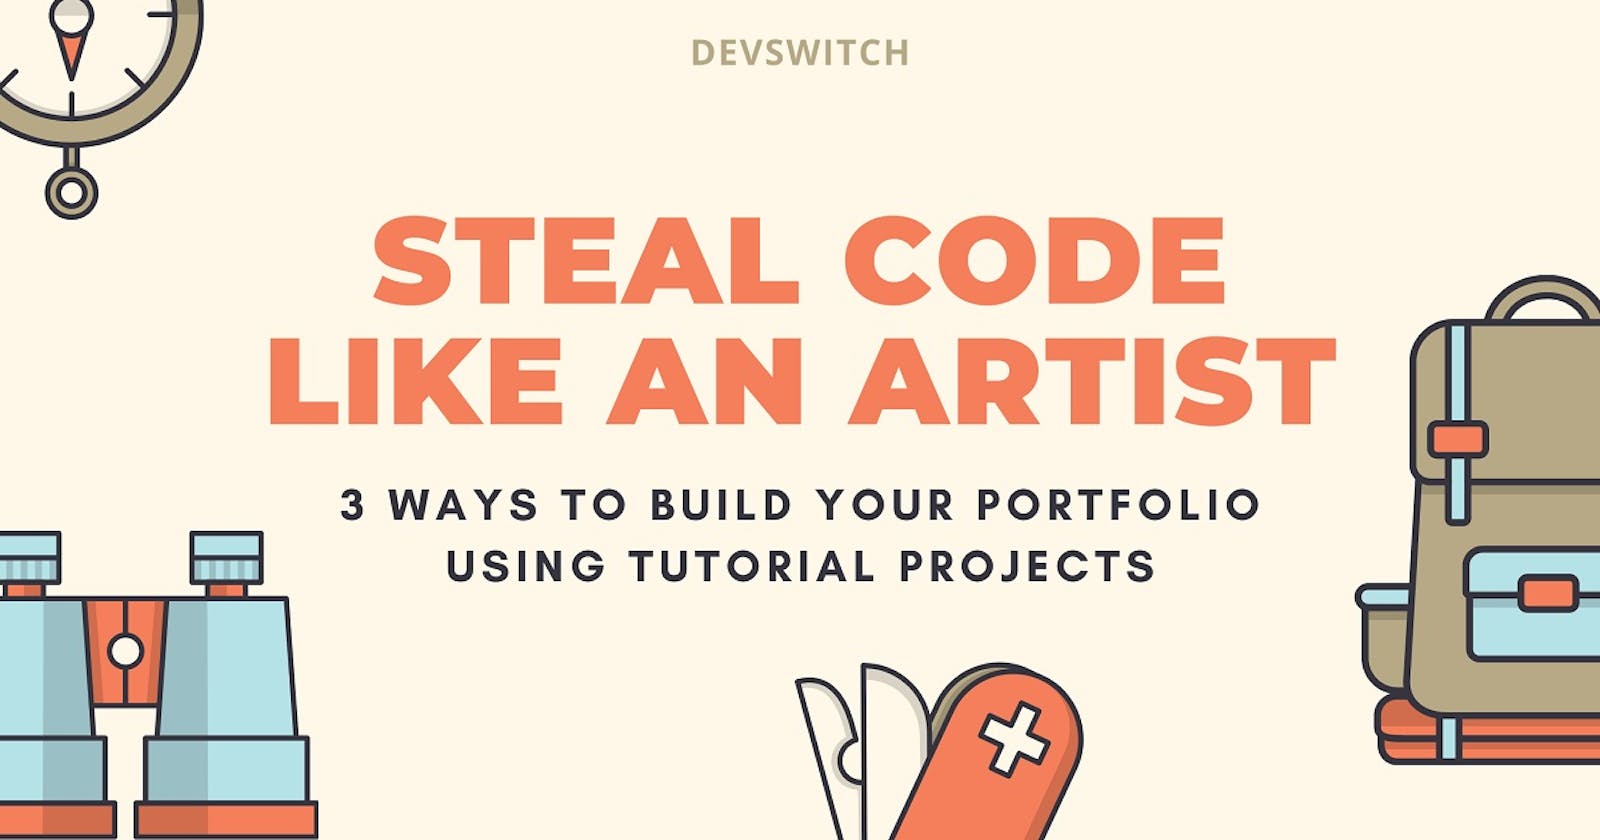 Steal Code like an Artist - 3 Ways to Build Your Portfolio Using Tutorial Projects